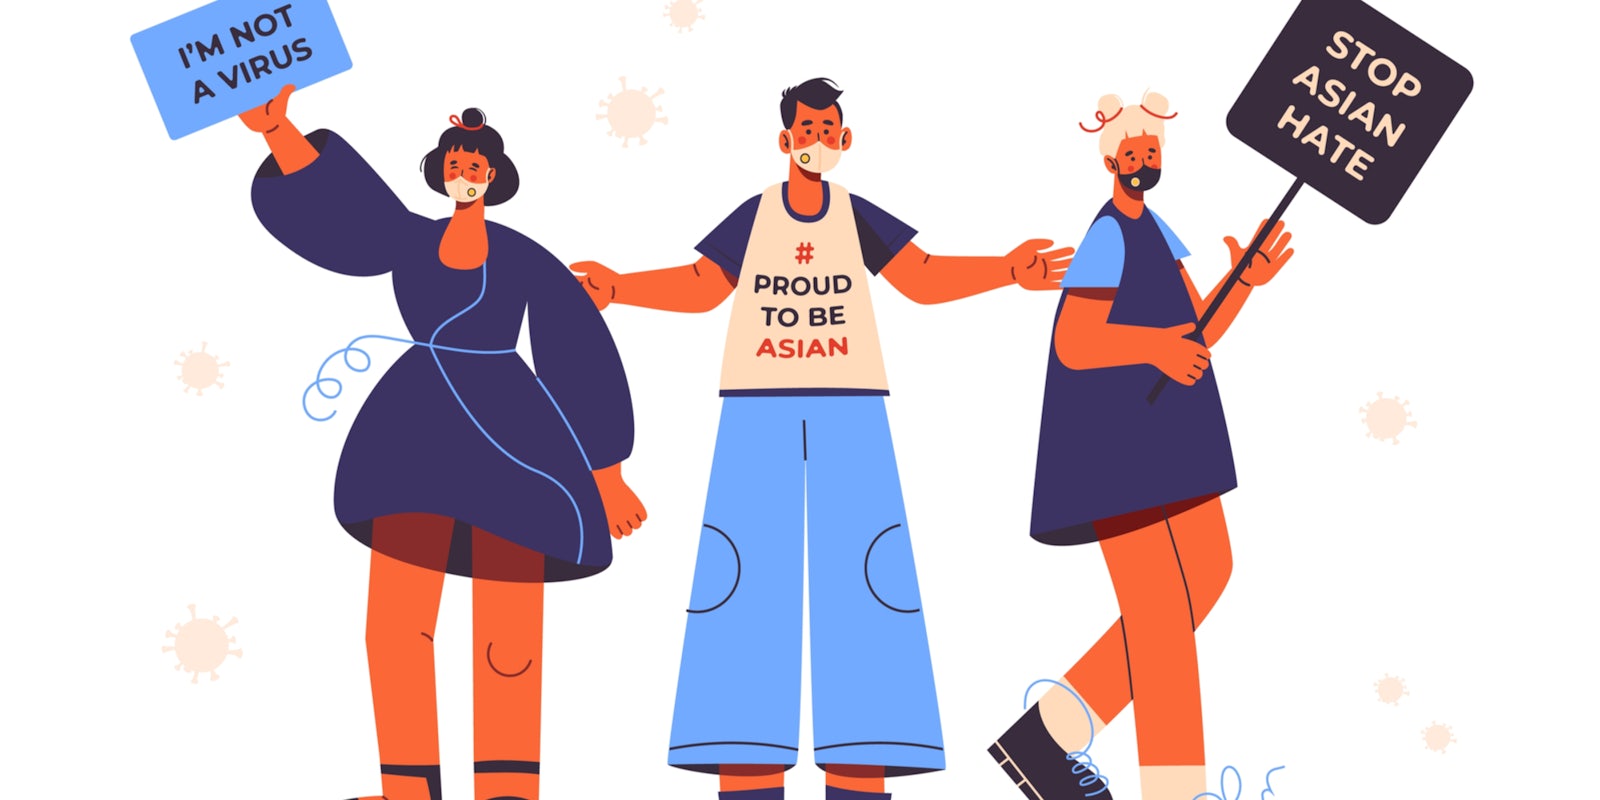 Stop Asian hate protest illustration